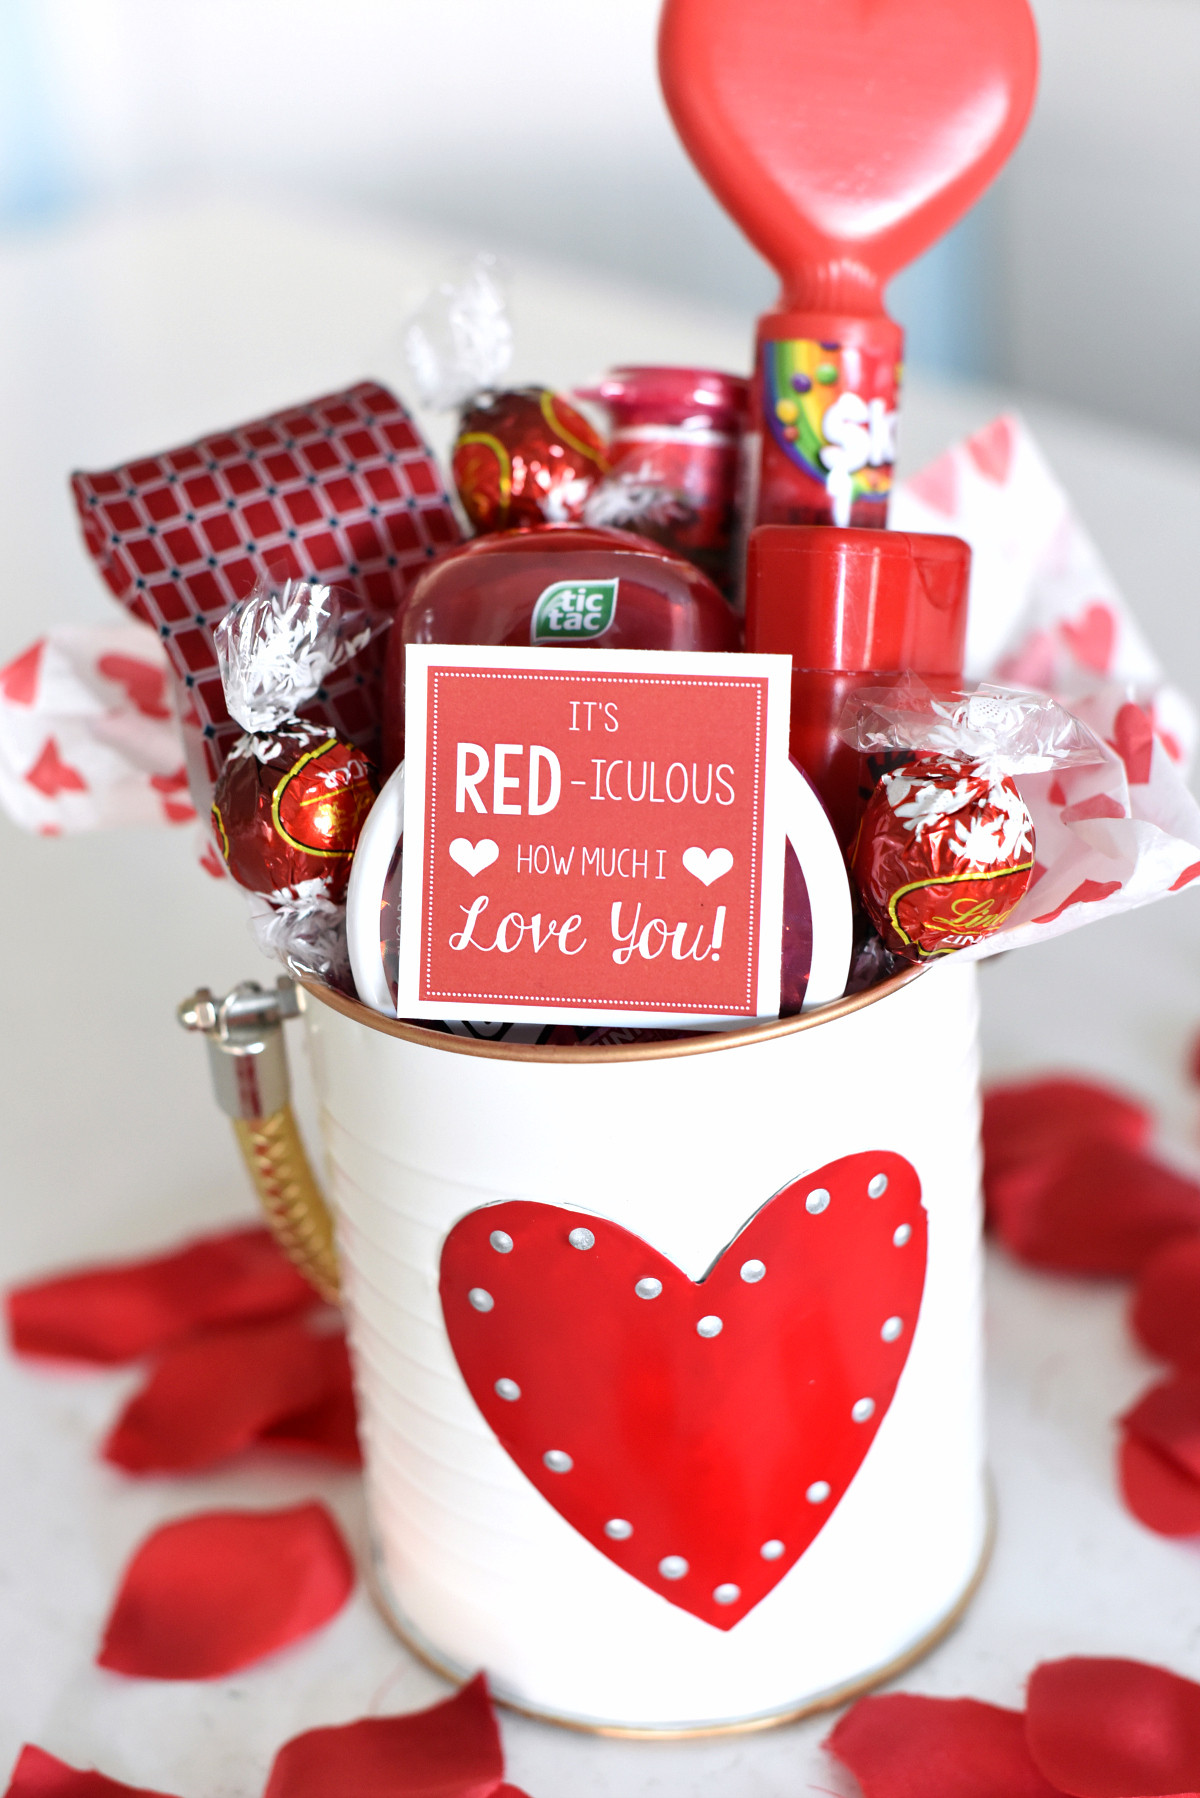 Cute Valentine Gift Ideas For Kids
 Cute Valentine s Day Gift Idea RED iculous Basket